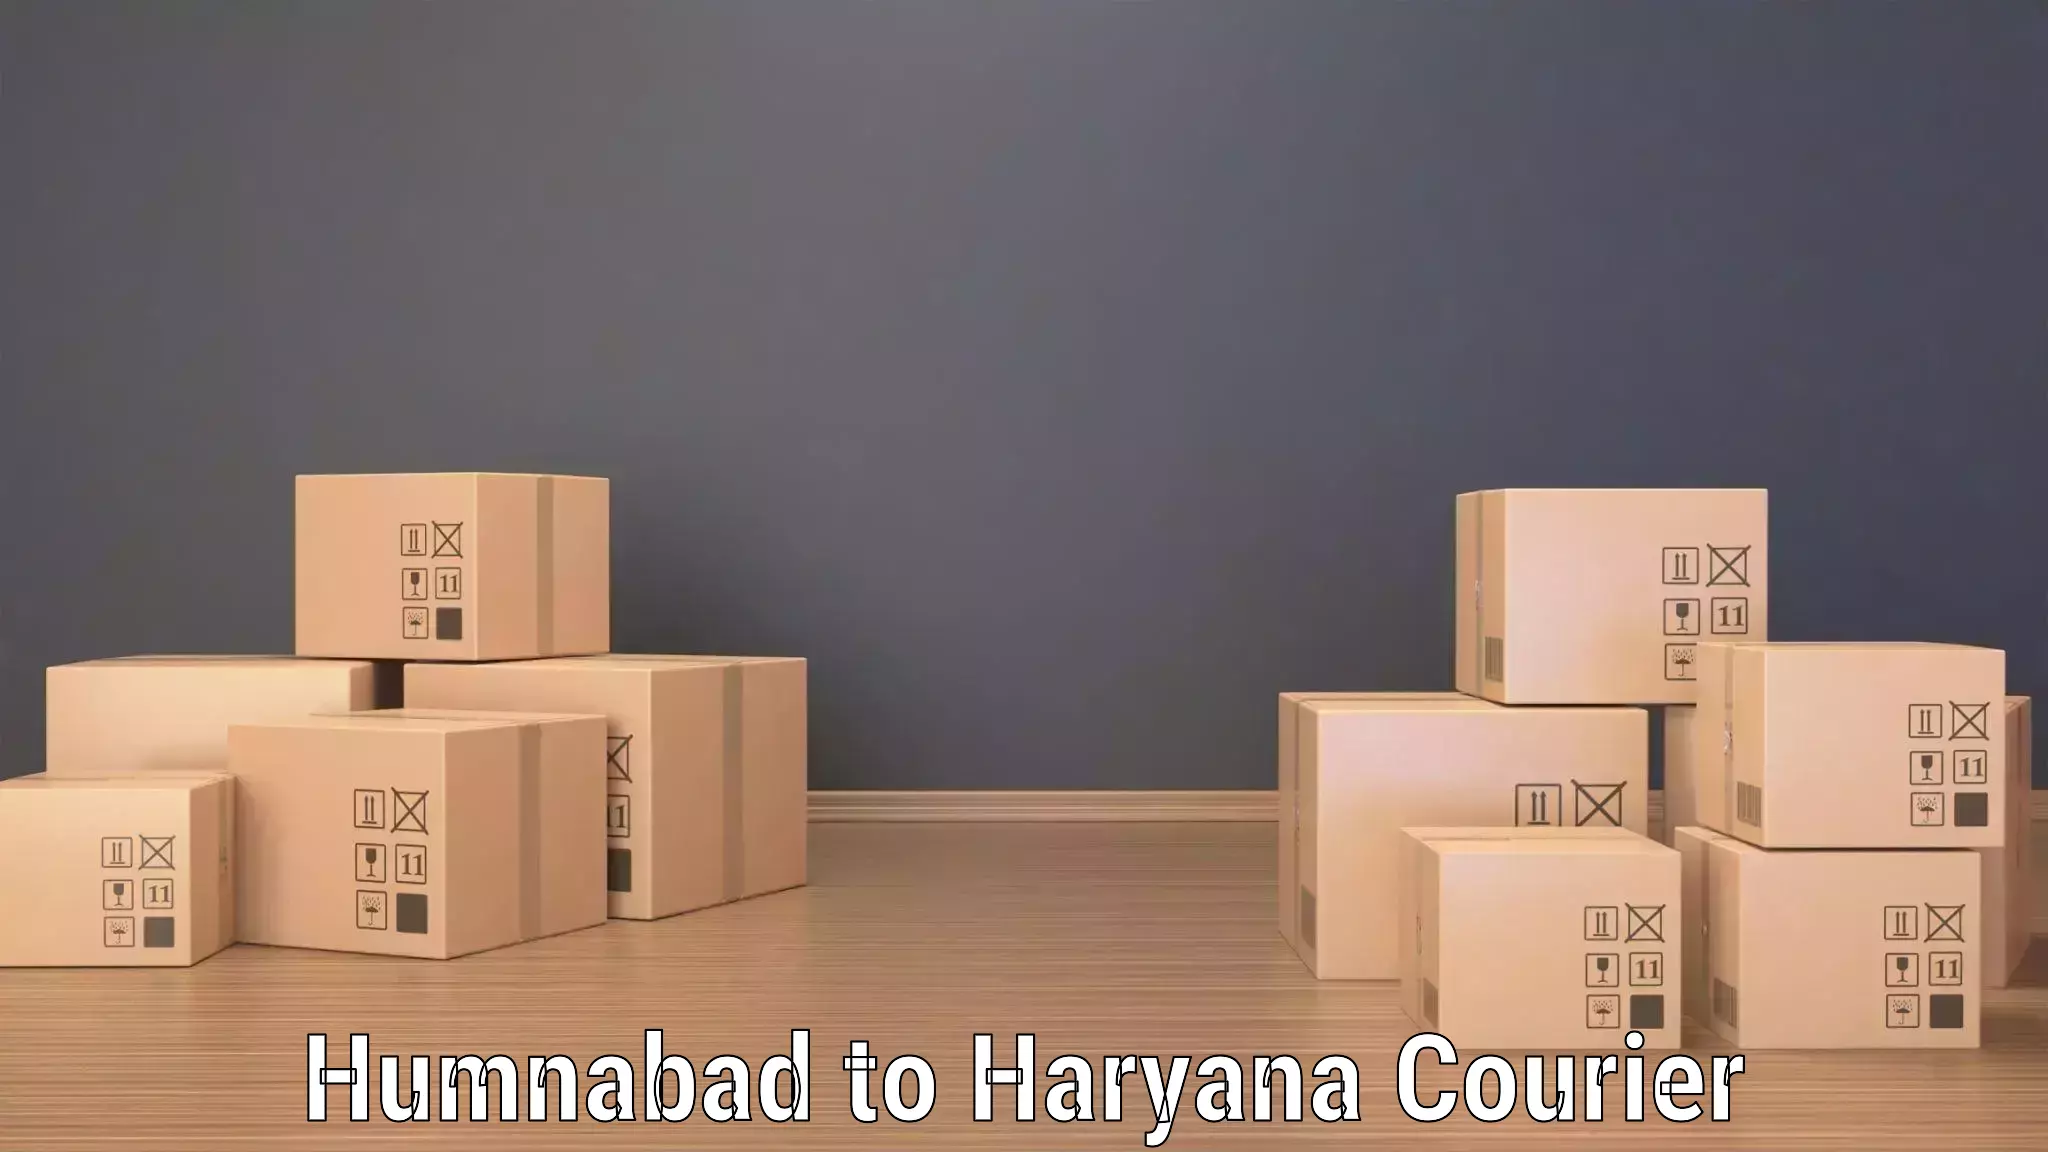 Scheduled delivery Humnabad to NCR Haryana